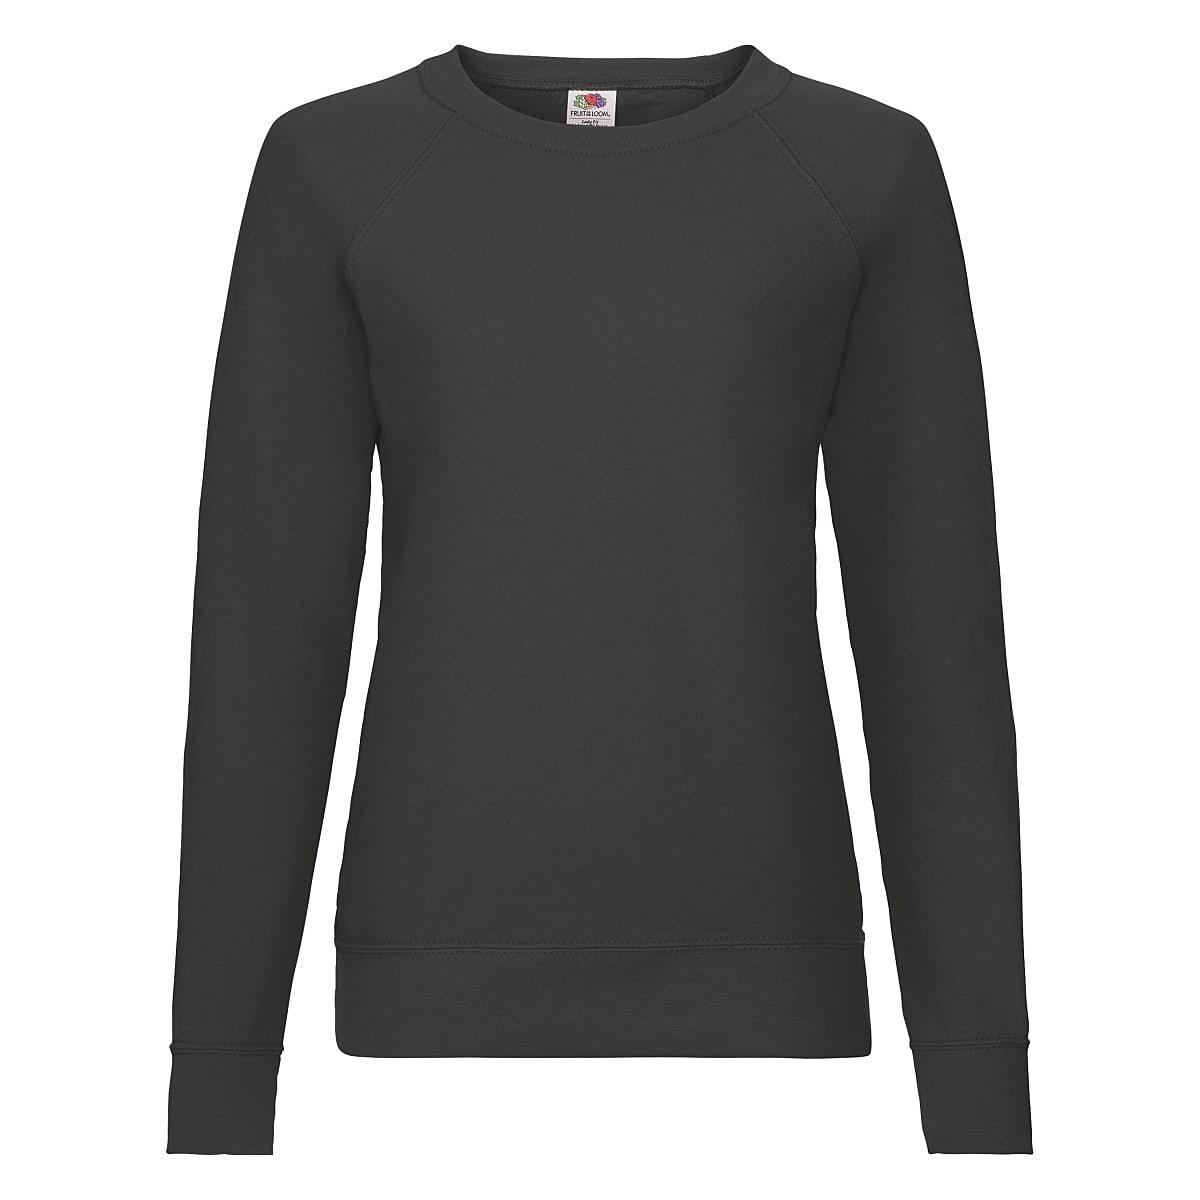 Fruit Of The Loom Lady-Fit Lightweight Raglan Sweater in Light Graphite (Product Code: 62146)